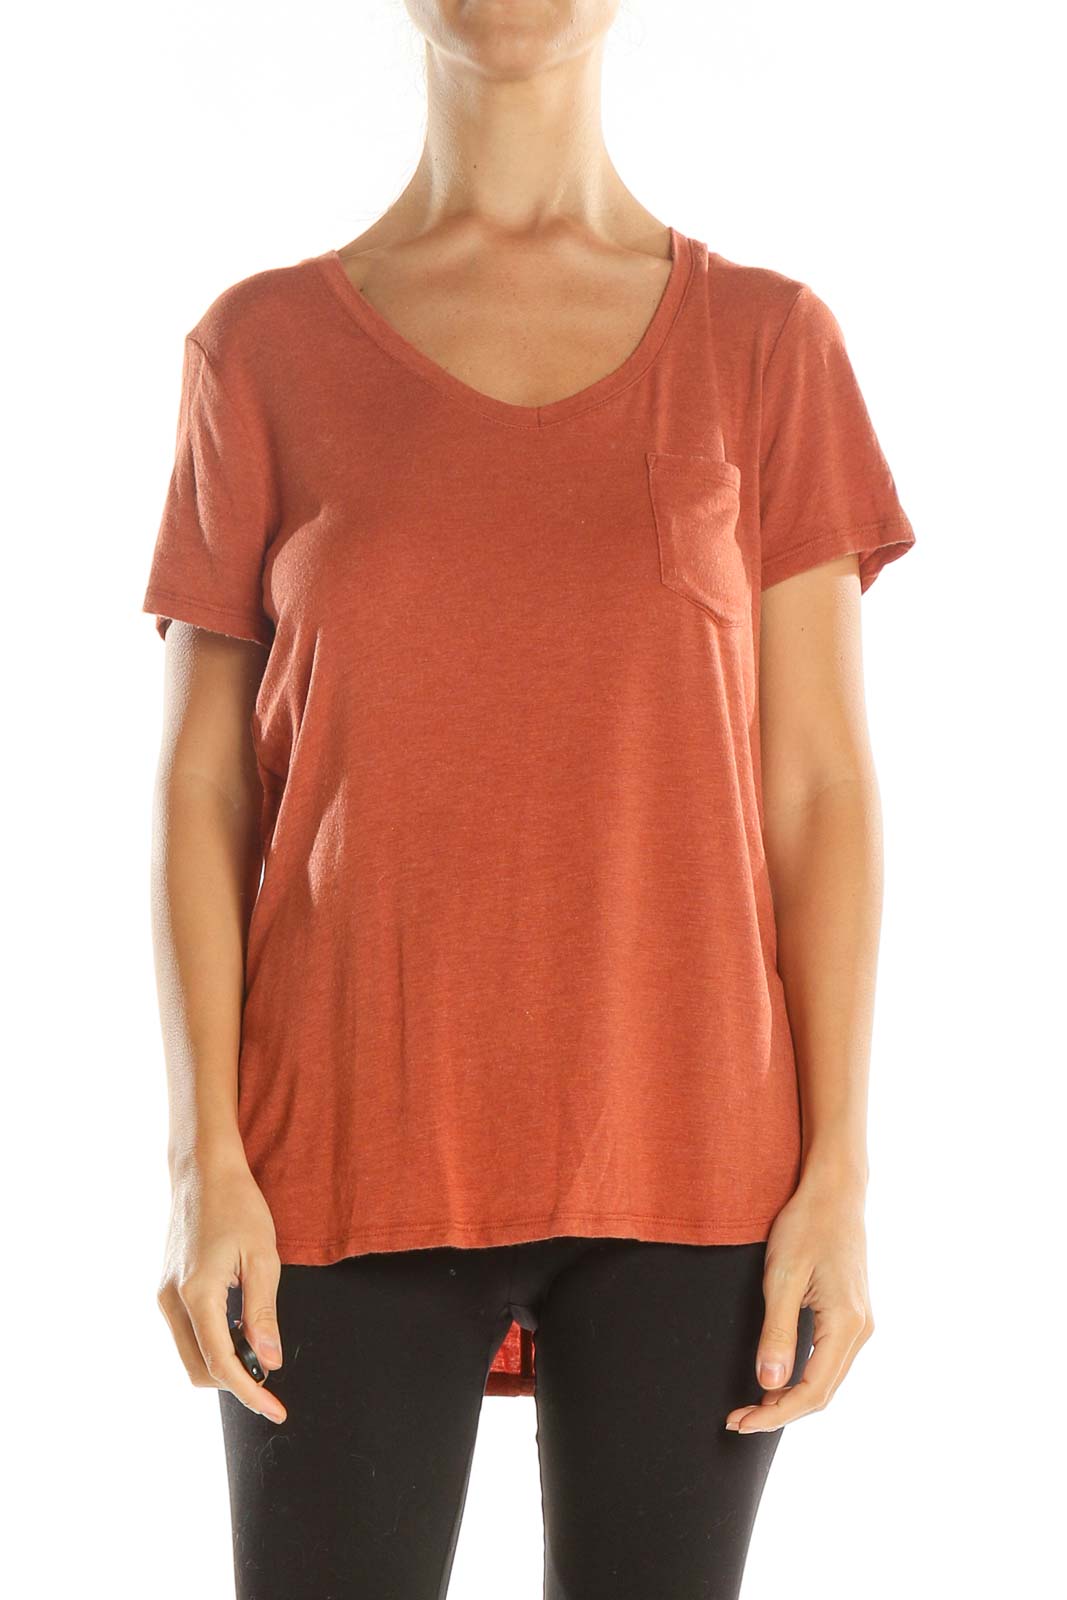 Red Casual T-Shirt Front